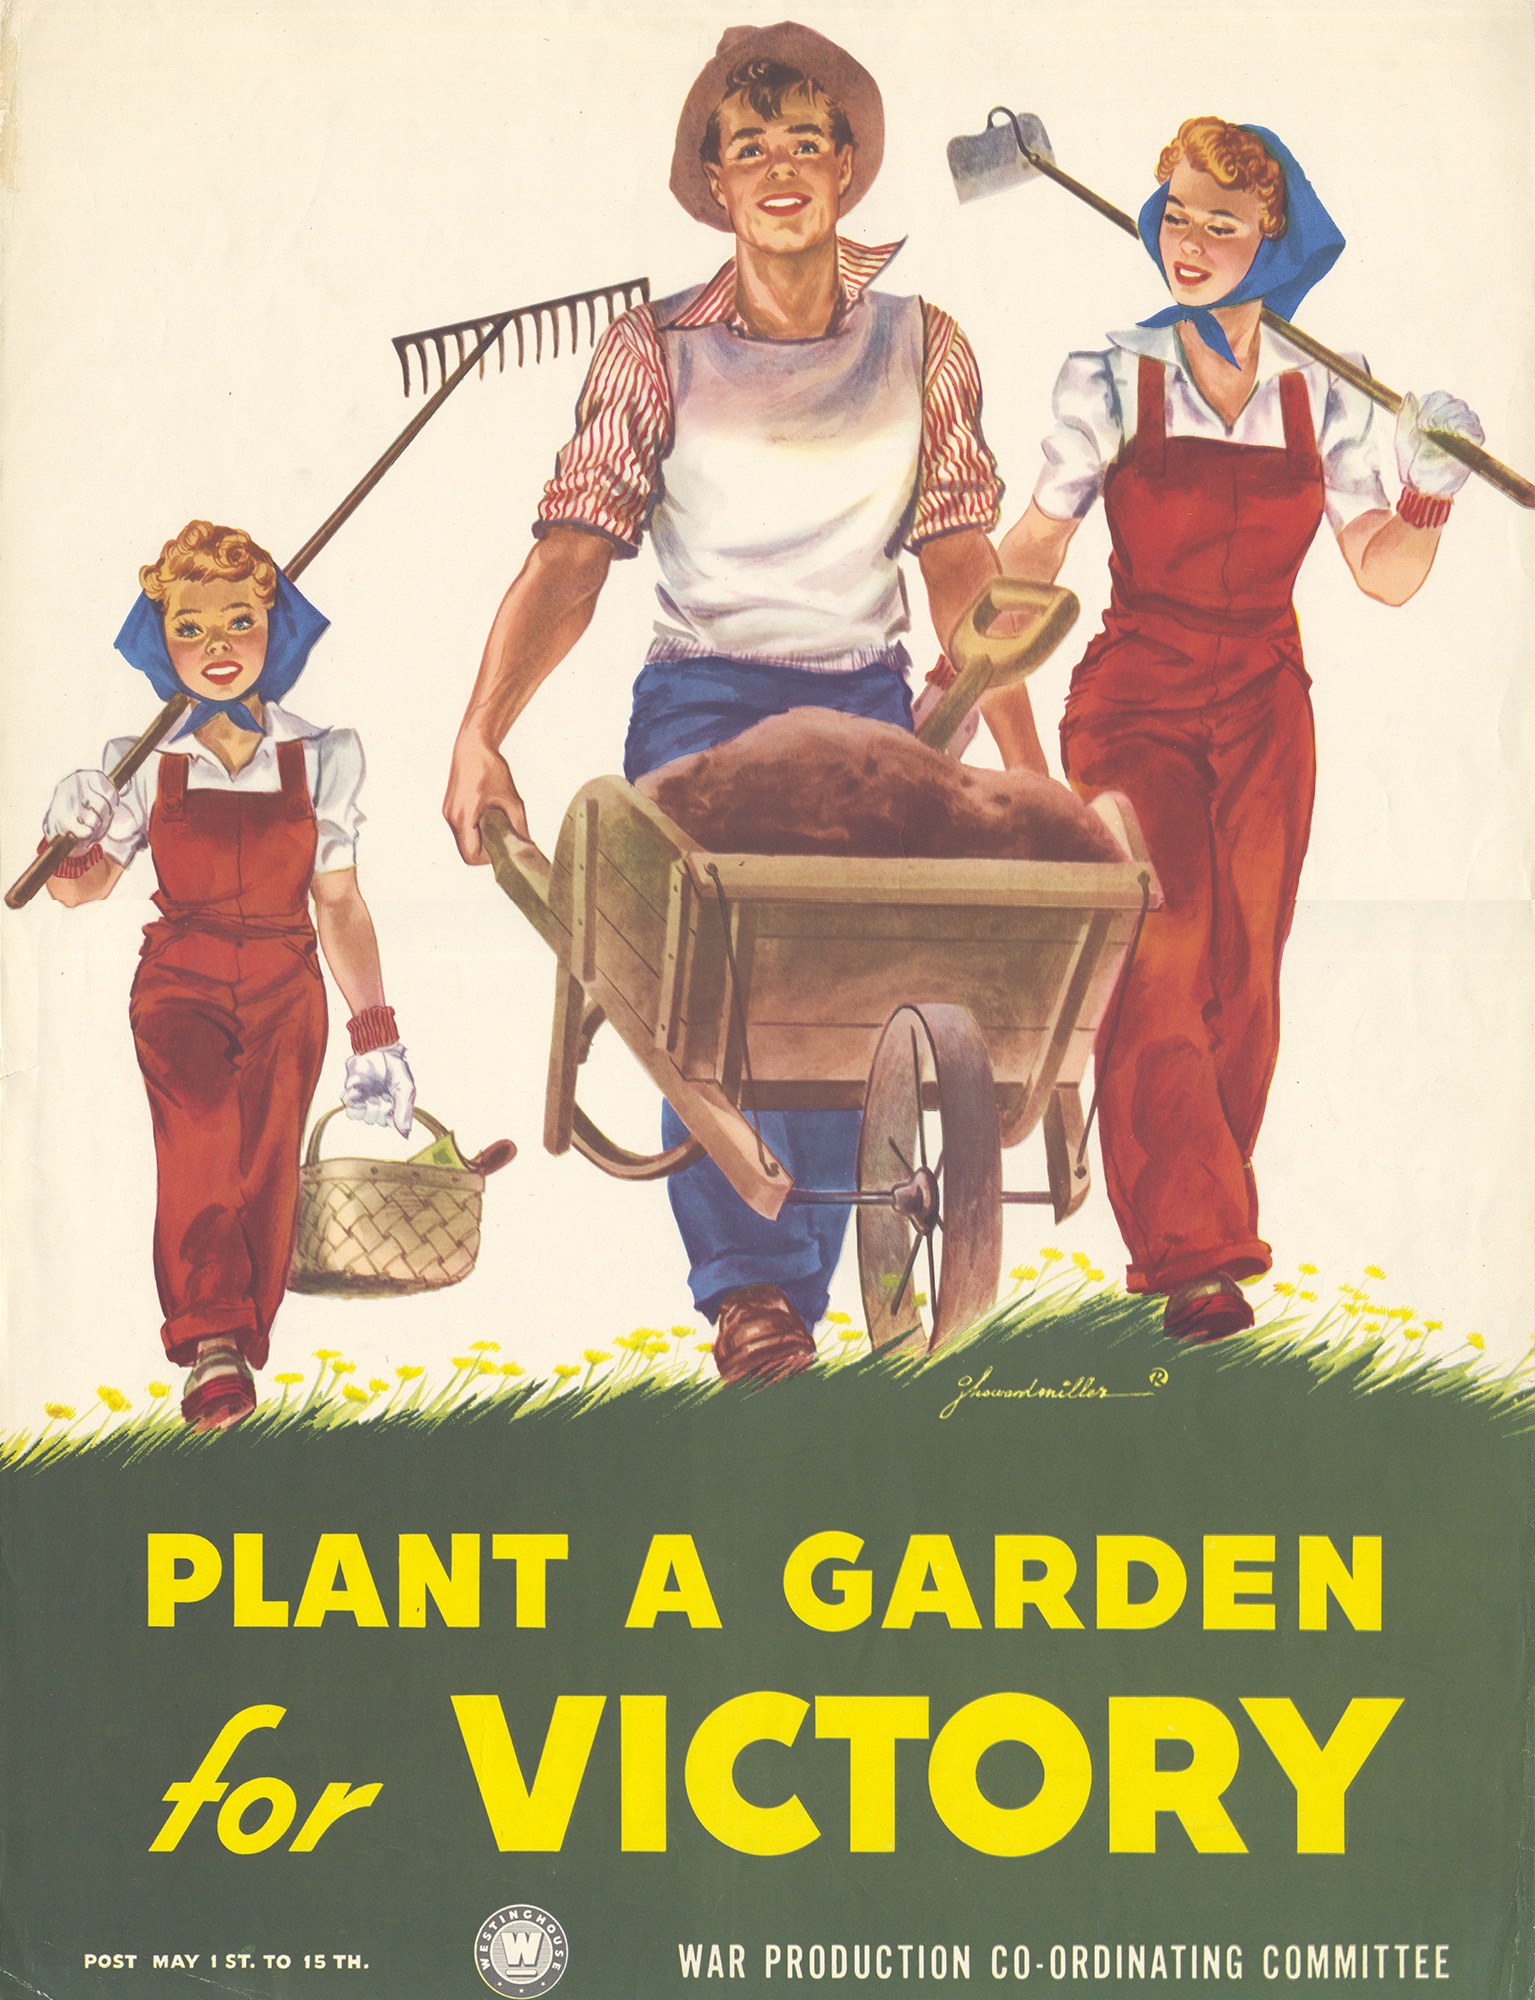 “Plant a Garden for Victory.” World War II poster by J. Howard Miller, for the Westinghouse War Production Co-Ordinating Committee, probably 1942.